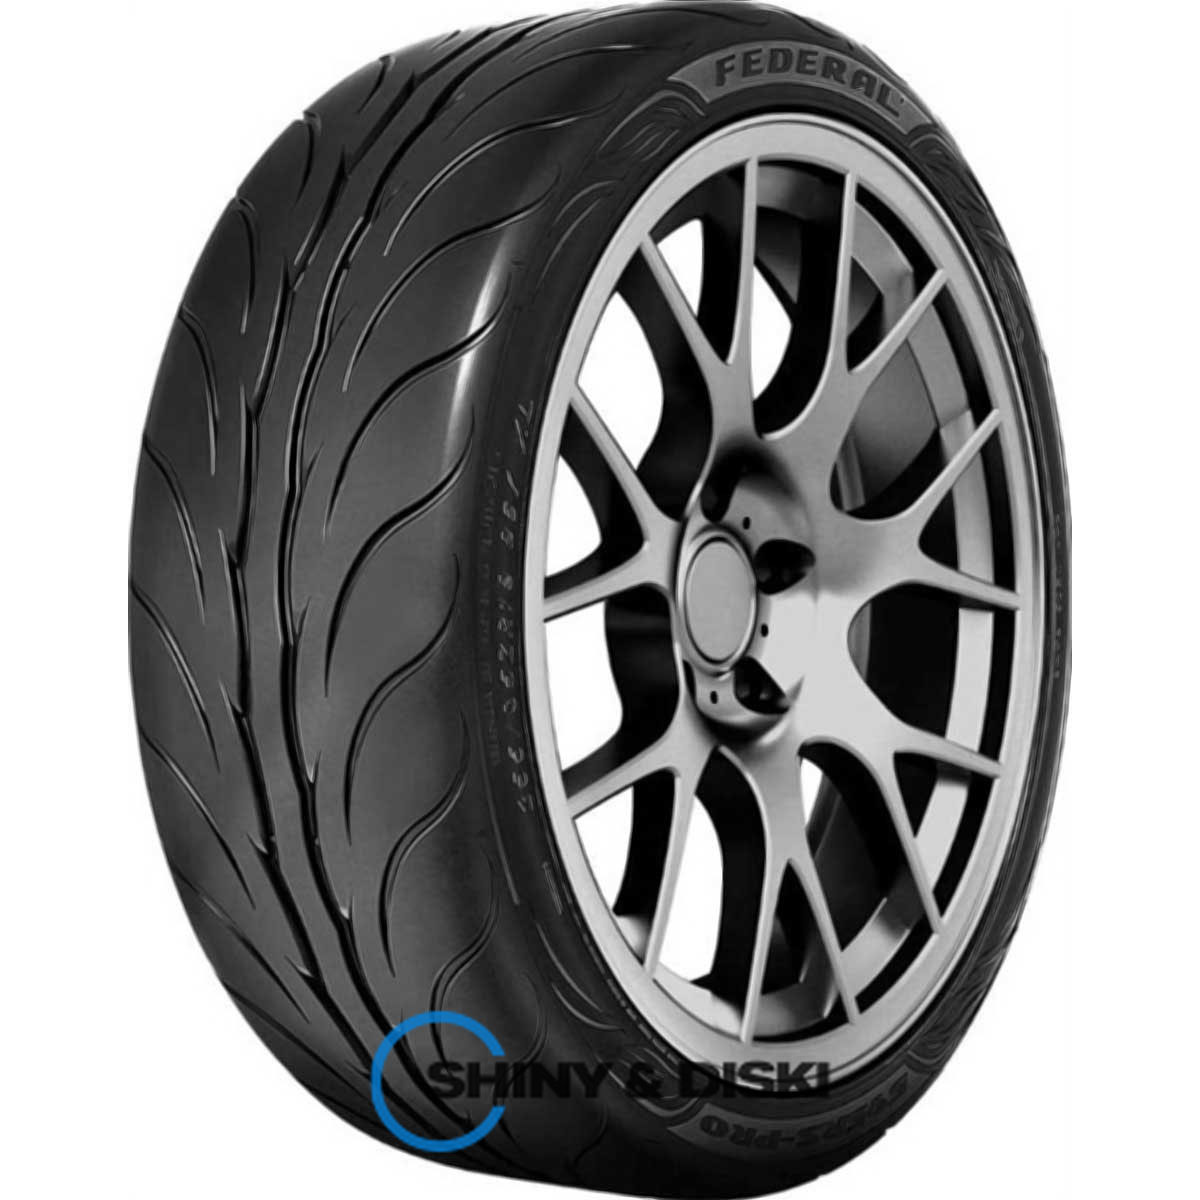 federal extreme performance 595 rs-pro